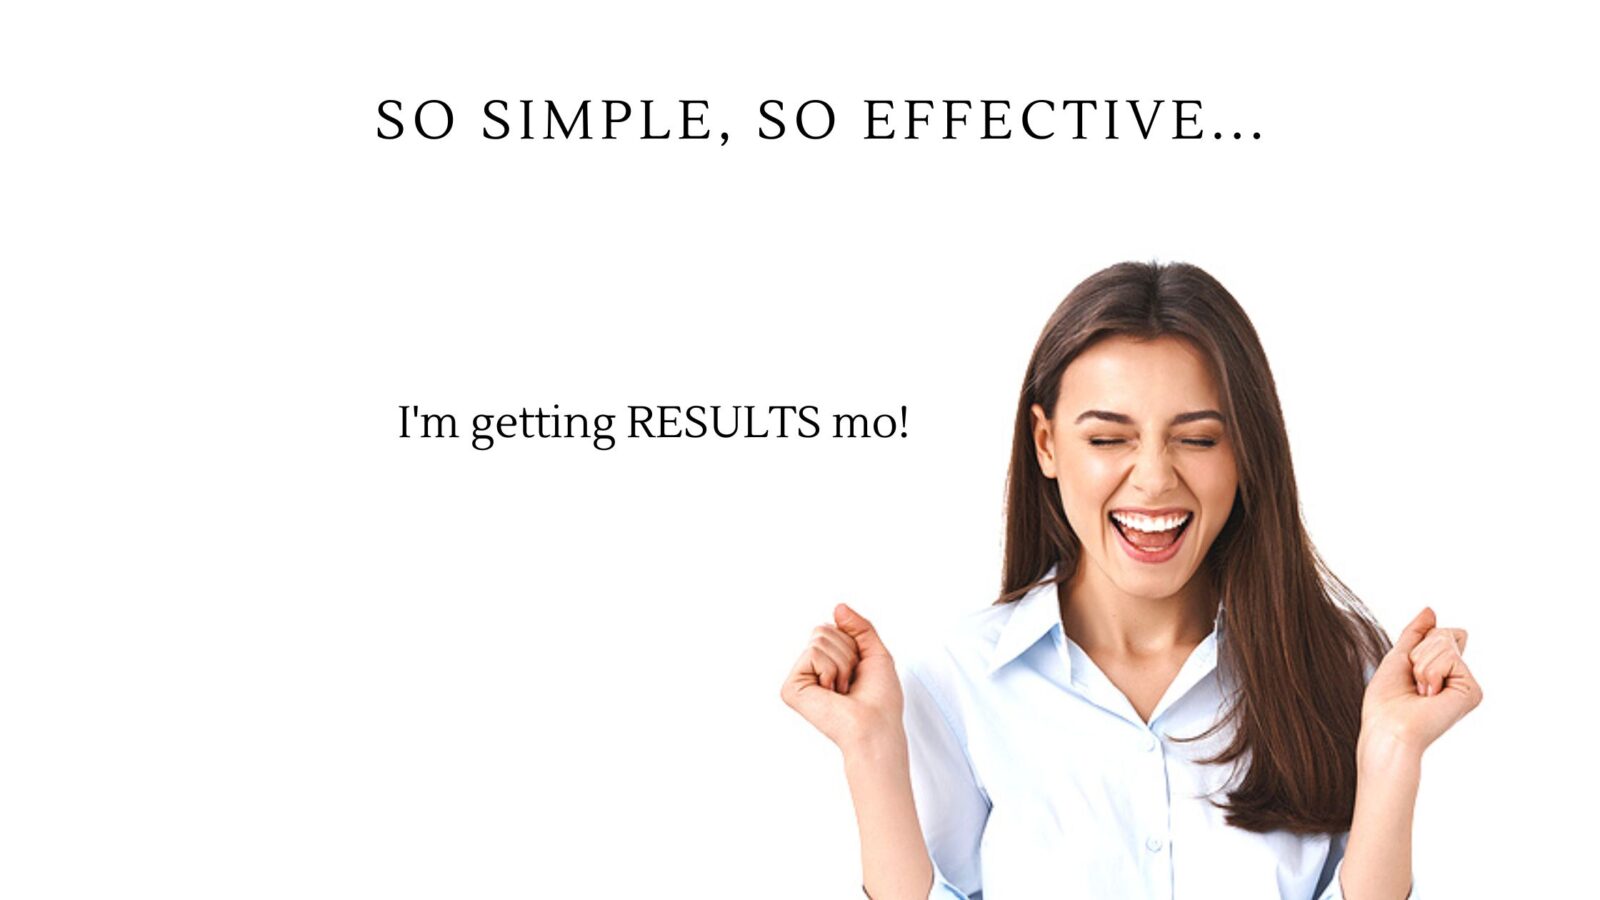 Share Your Results Form Woman Excited. Eyes Closed Mouth Smiling at showing the joy of feeling better.